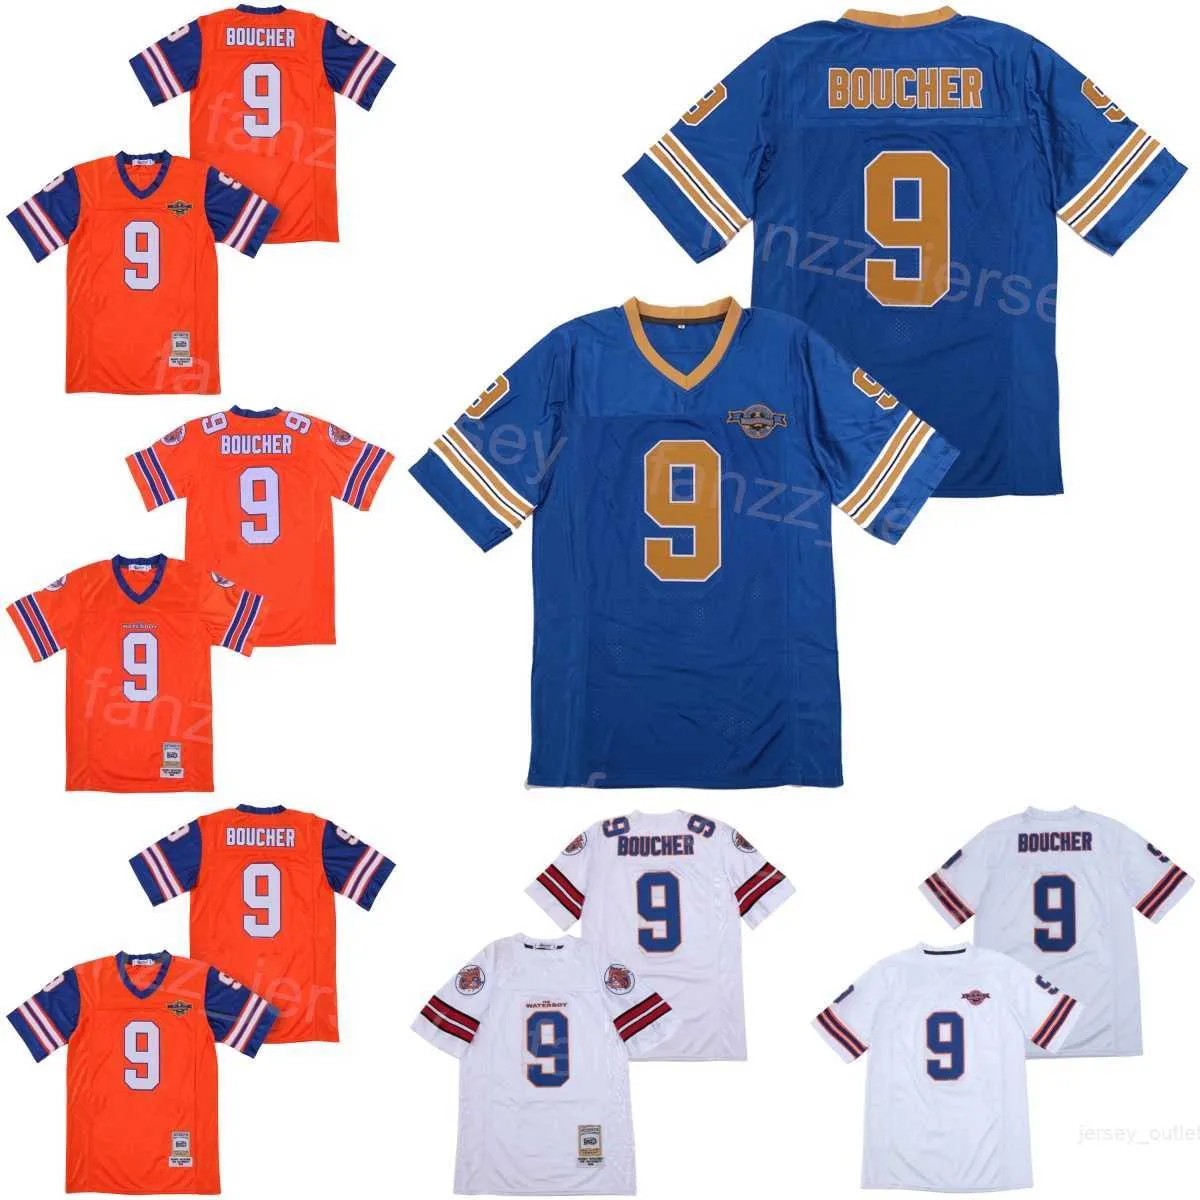 Voetbalfilm The Waterboy Adam Sandler Jerseys 9 Bobby Boucher Mud Dogs Bourbon Bowl Men All Stitched Team Orange Blue Awit White Breathable University Pullover